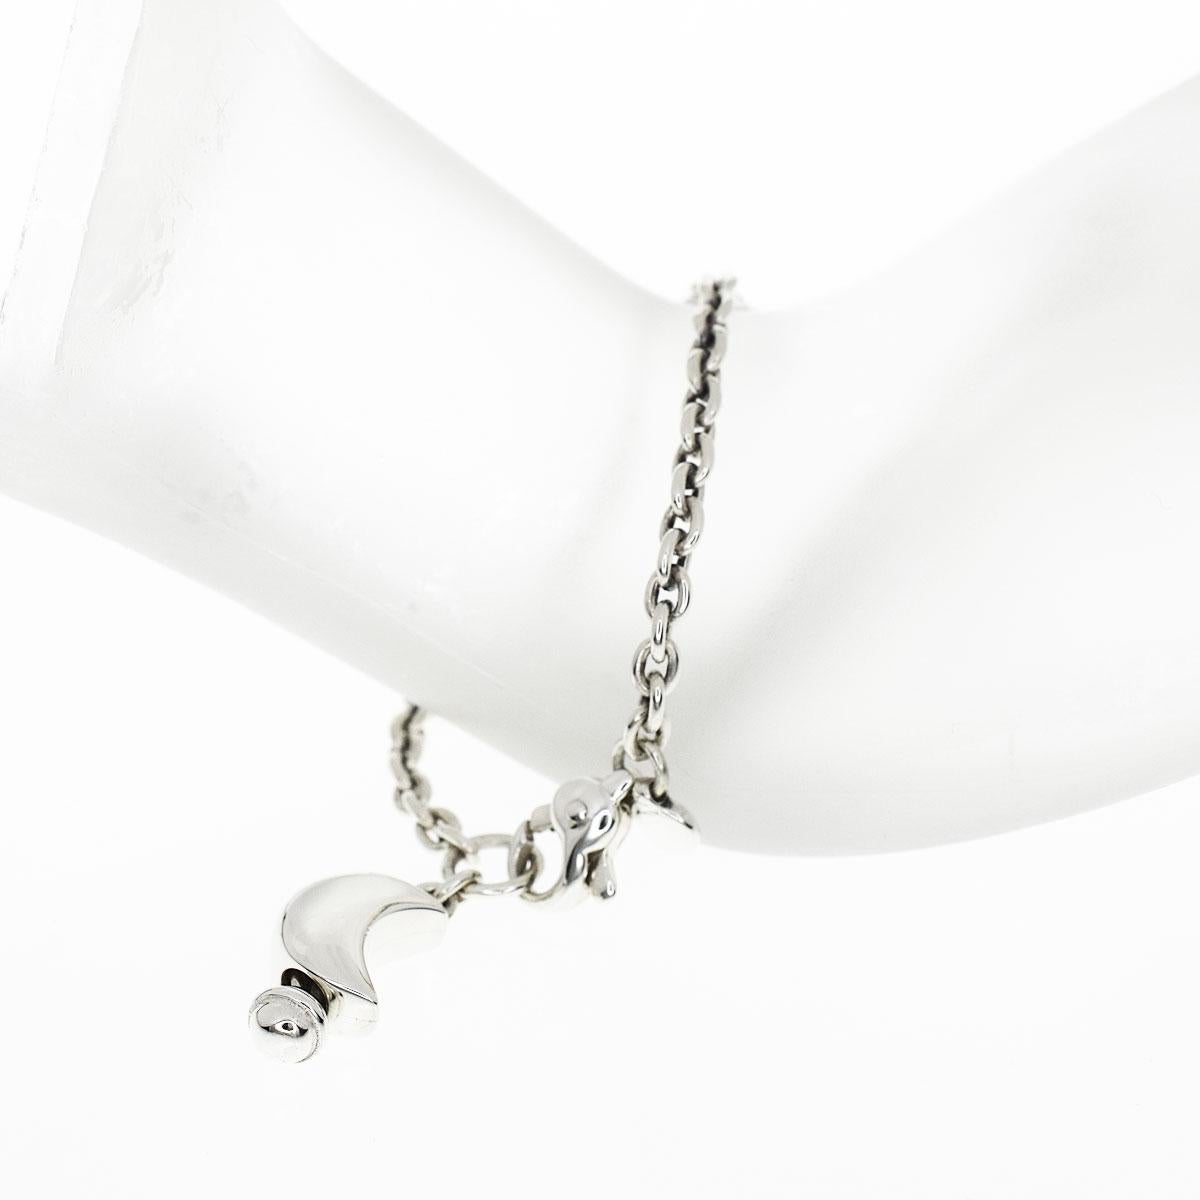 Brand:TIFFANY&Co.
Name:Moon Motif Bracelet
Material:Sterling Silver
Weight:11.9g（Approx)
Band length(inch):19.0cm / 7.48